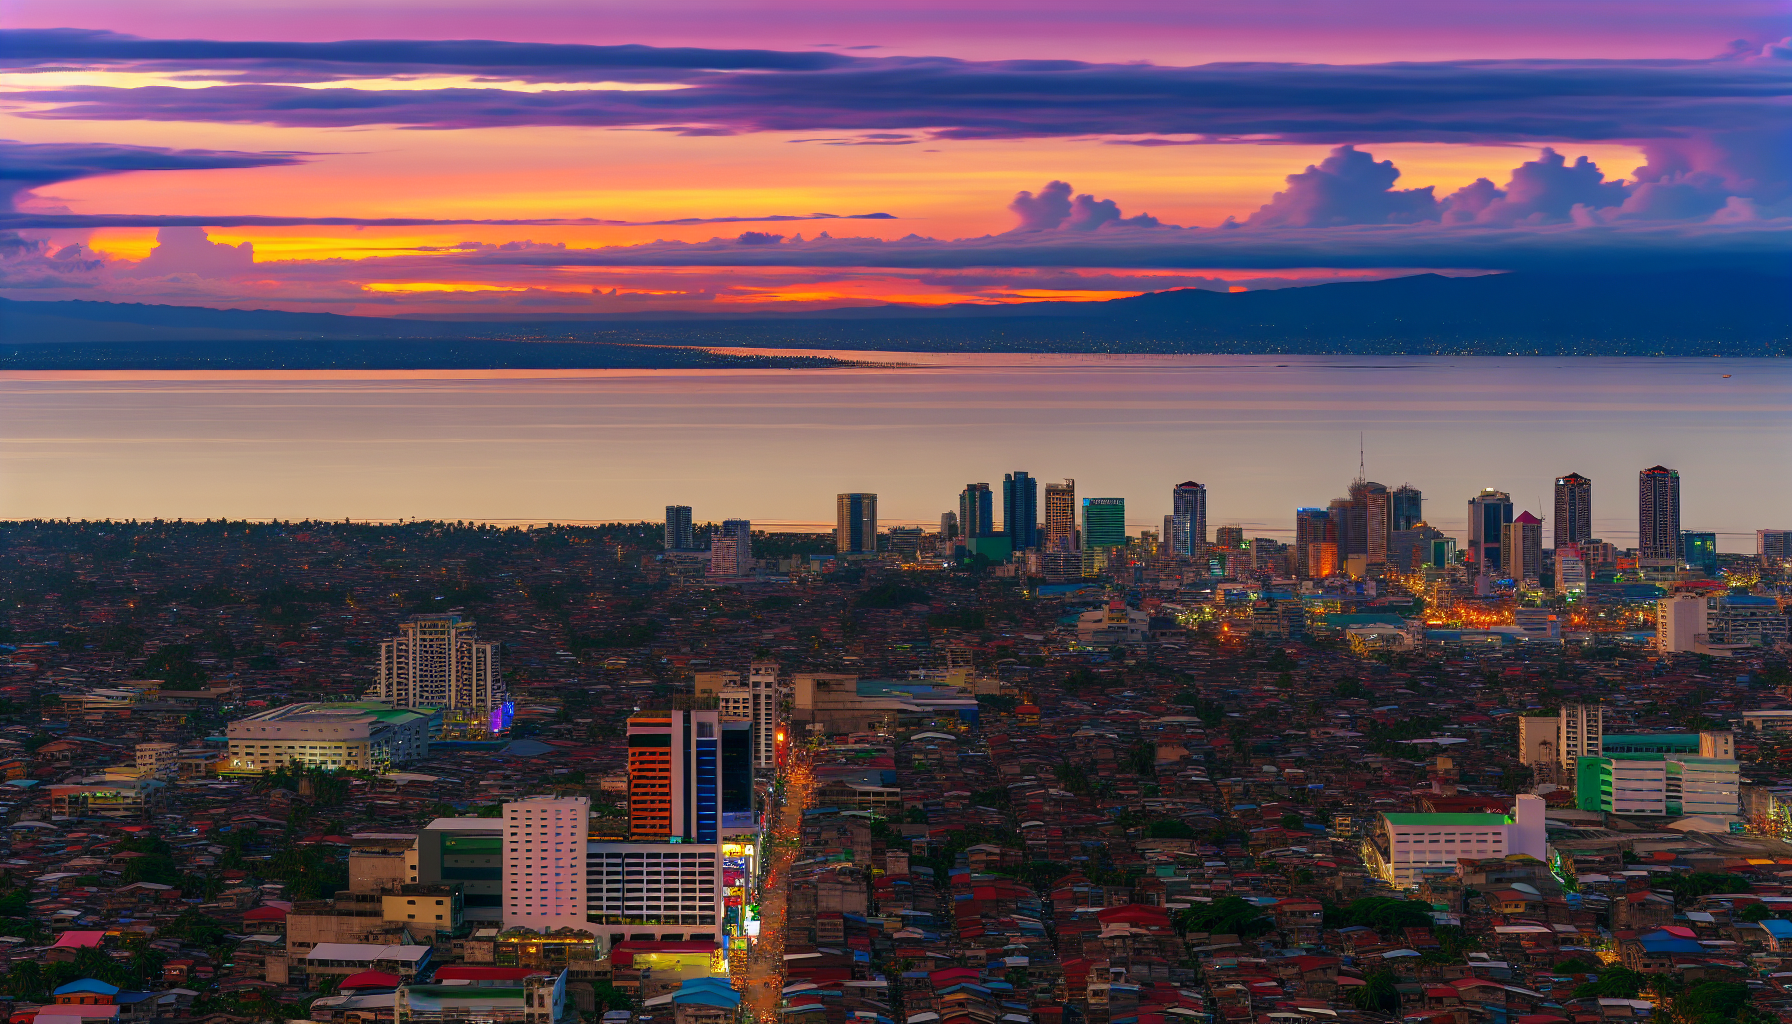 Davao City skyline at sunset with Davao Gulf in the background